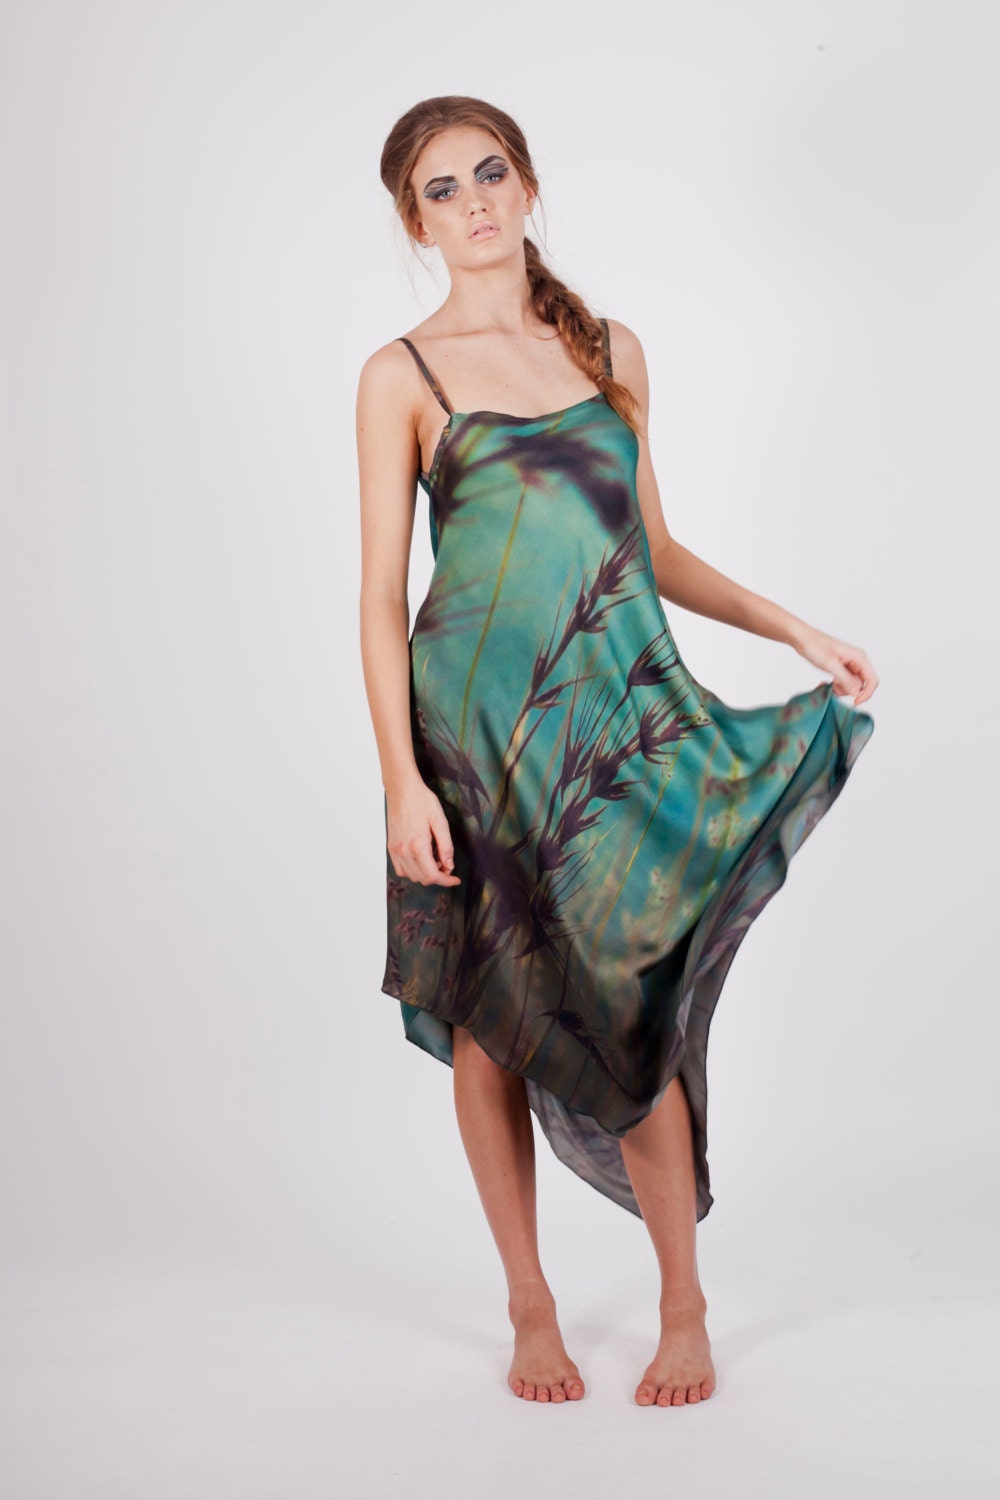 Long Silk Georgette Dress Printed with Ocean and Grasses at Sunset - HarrietJane